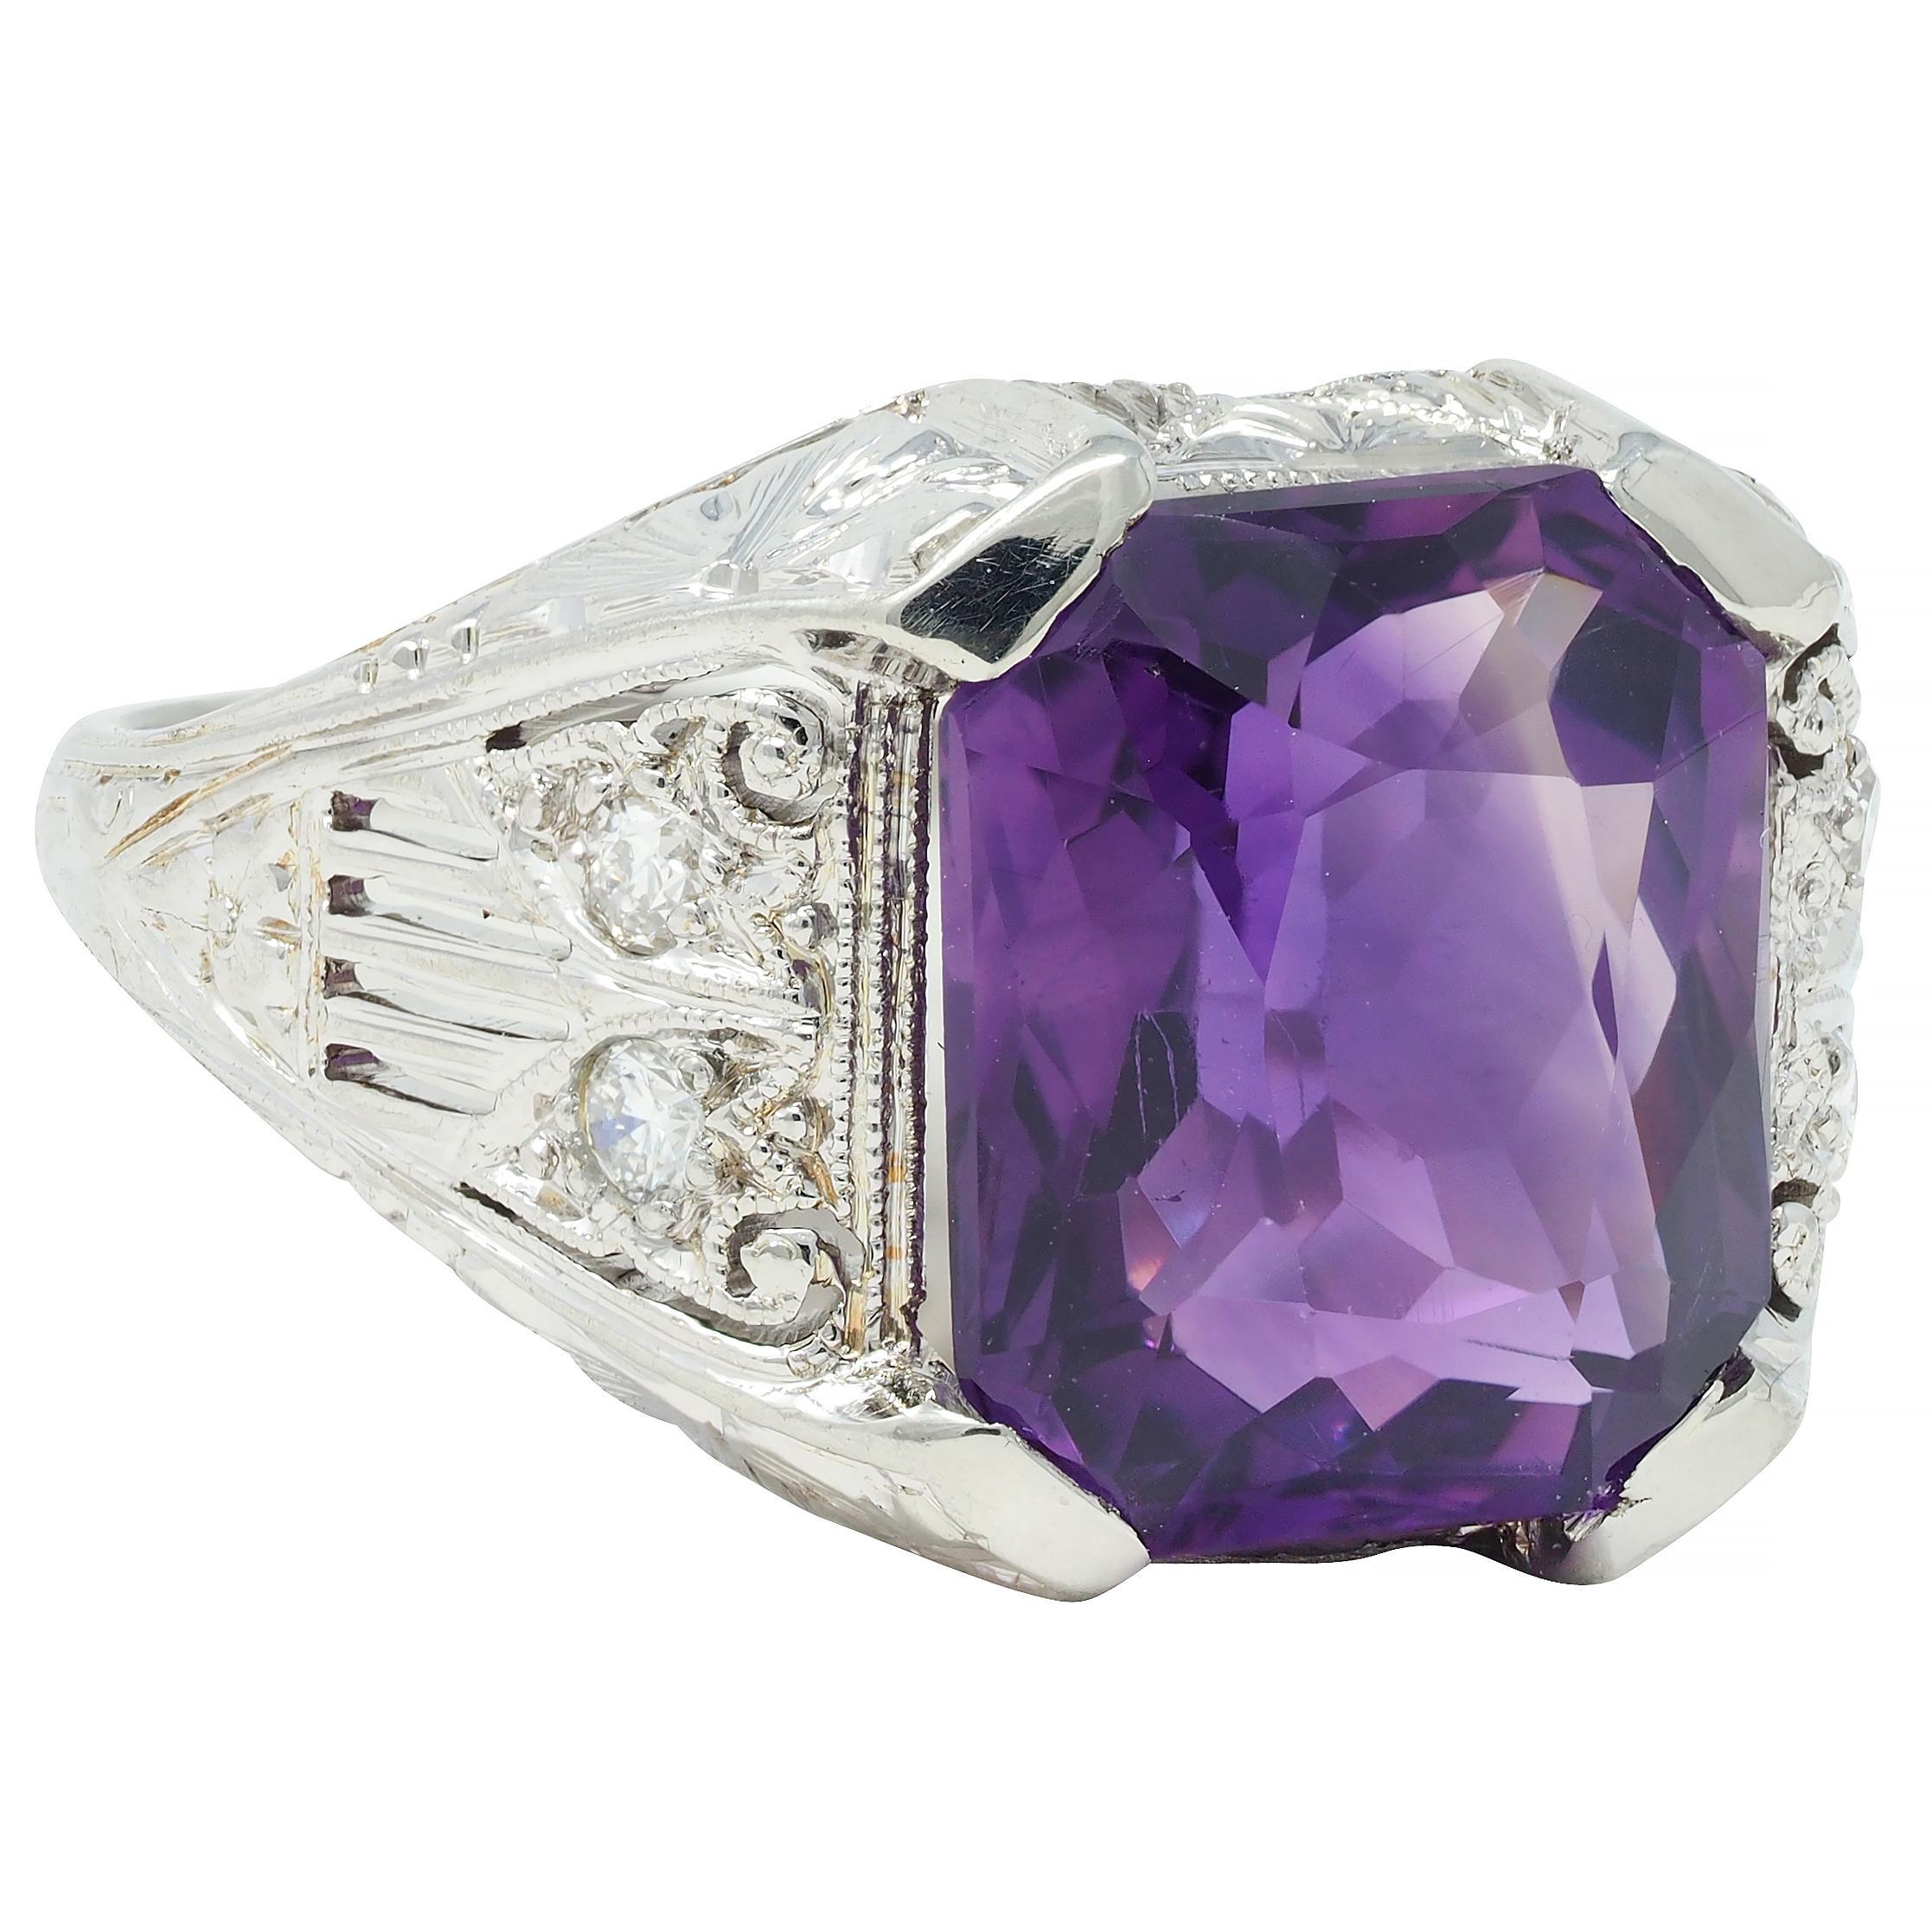 Centering an octagonal-shaped mixed-cut amethyst measuring 9.5 x 11.5 mm 
Transparent medium to light pinkish-purple to purple in color
Set with wide prongs and flanked by old single cut diamonds
Weighing approximately 0.12 carat total - eye clean